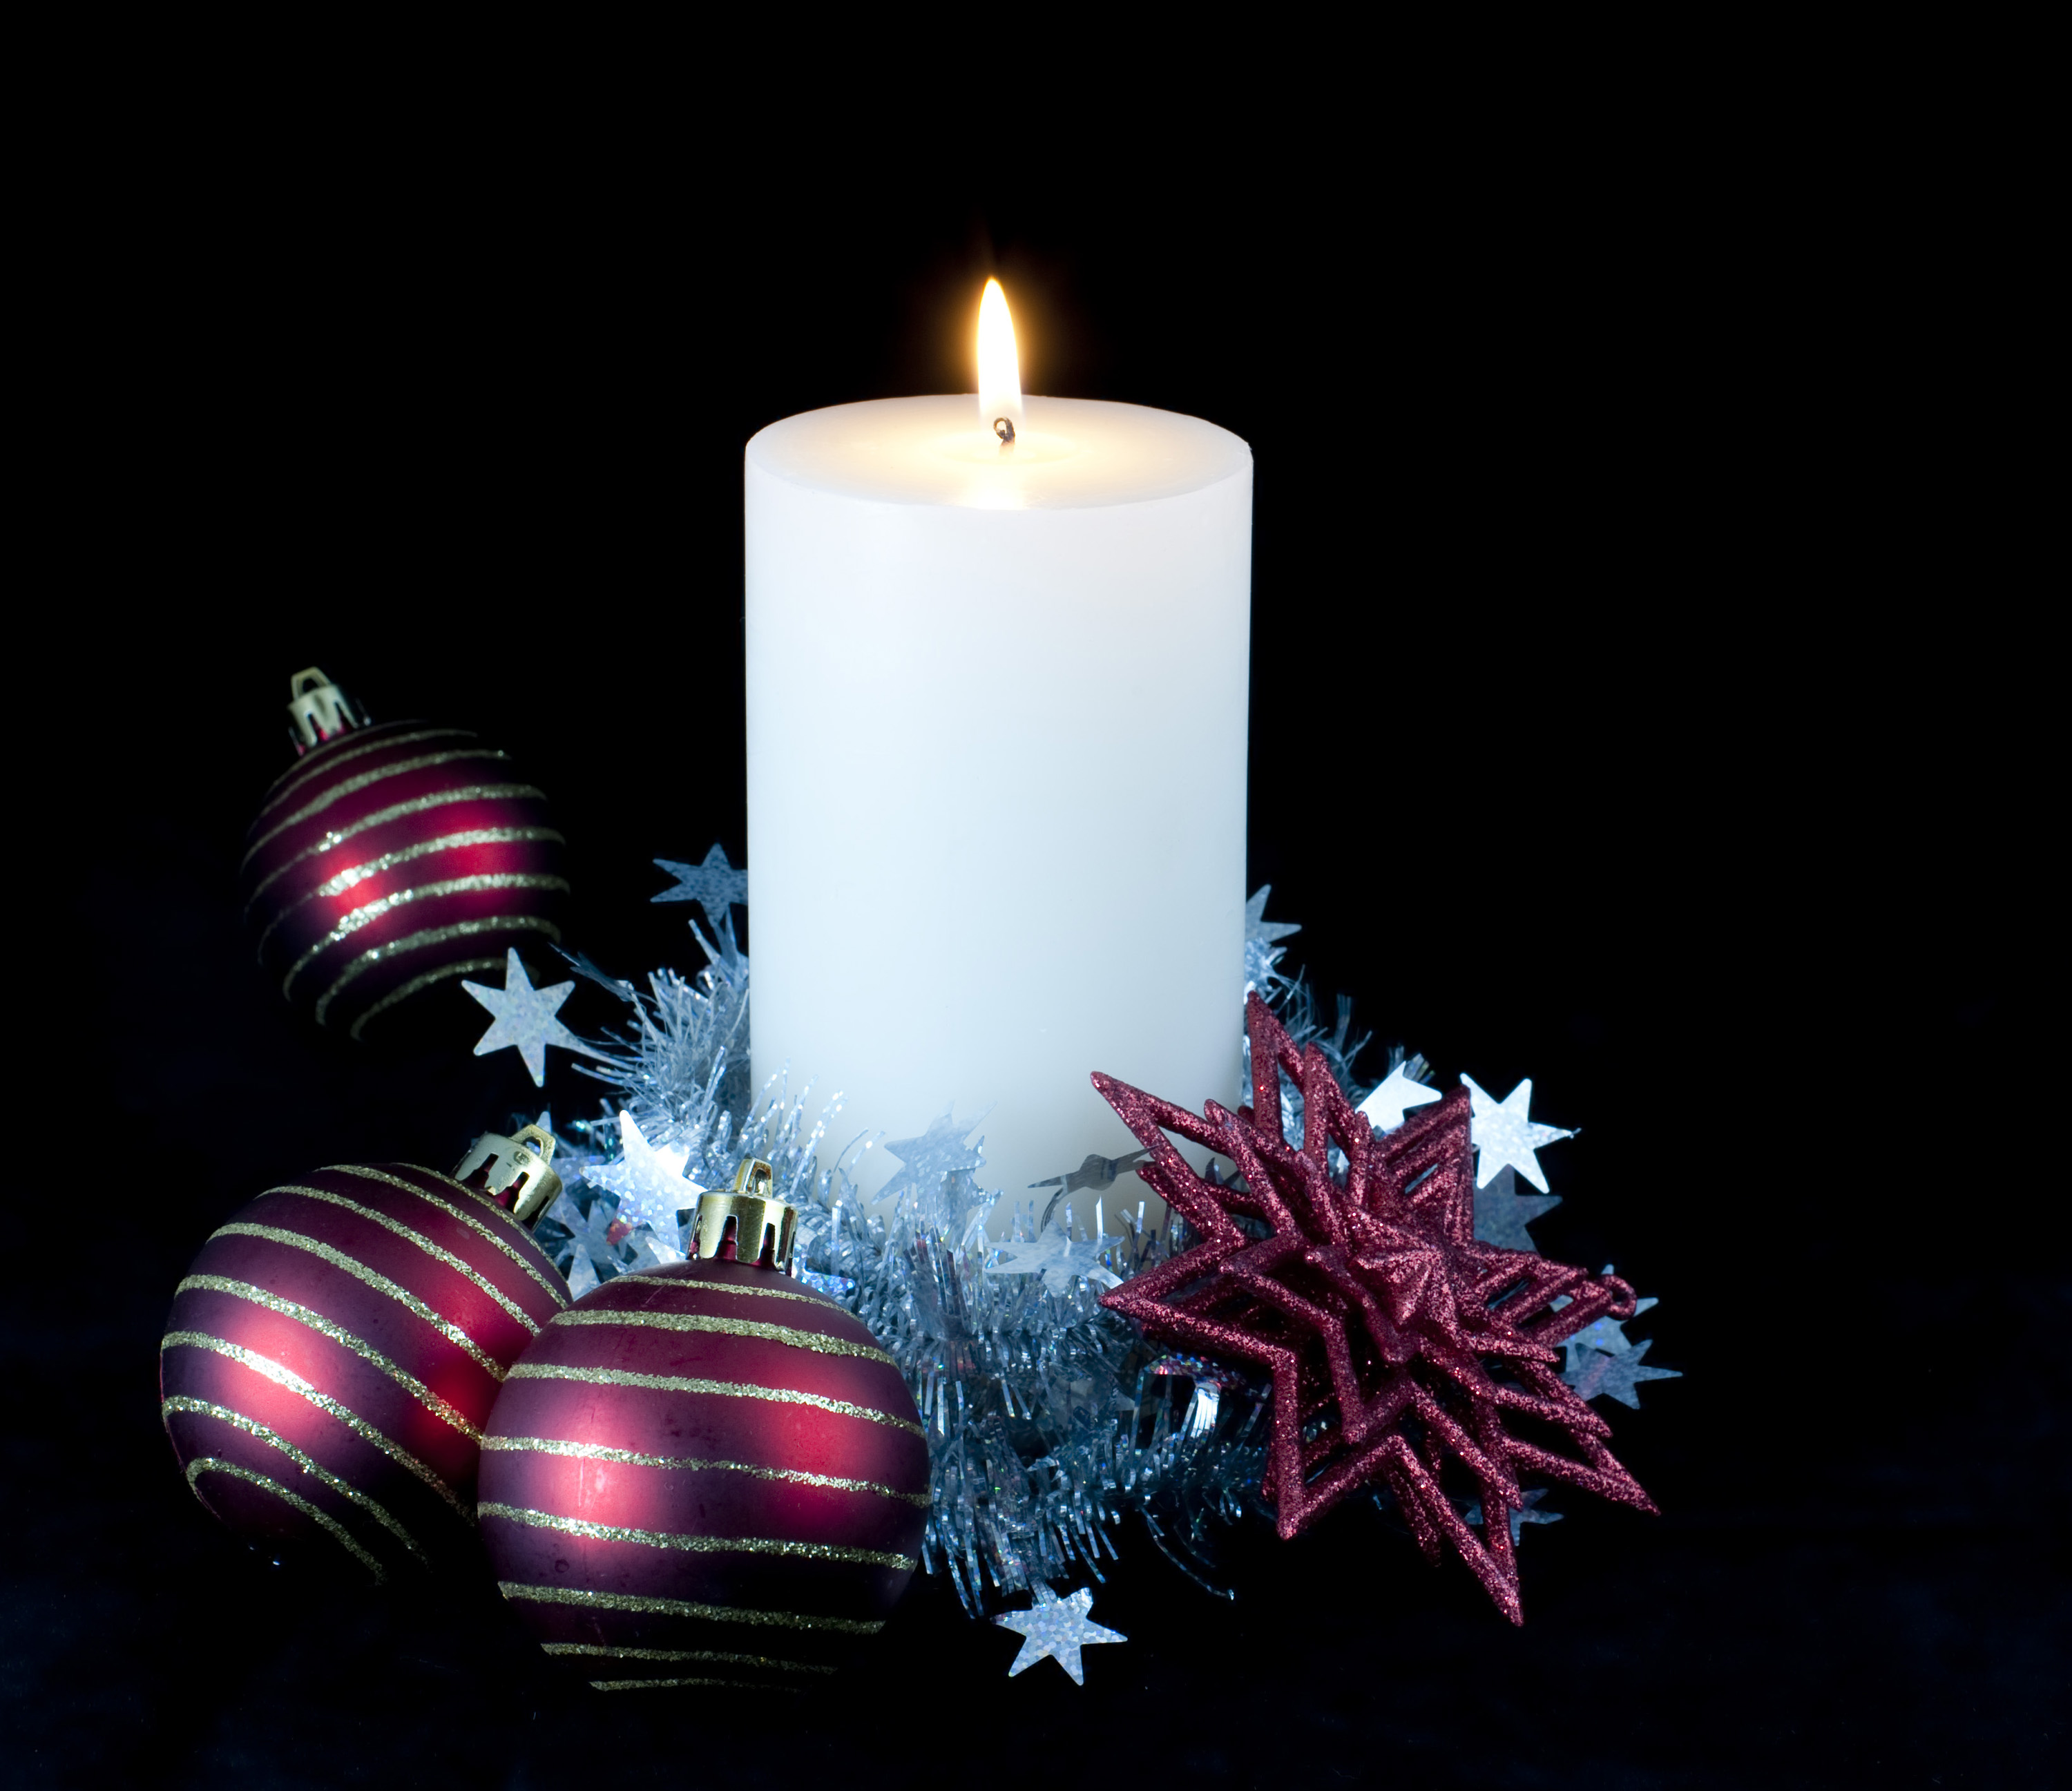 Free Stock Photo 3597festive decorated candle  freeimageslive